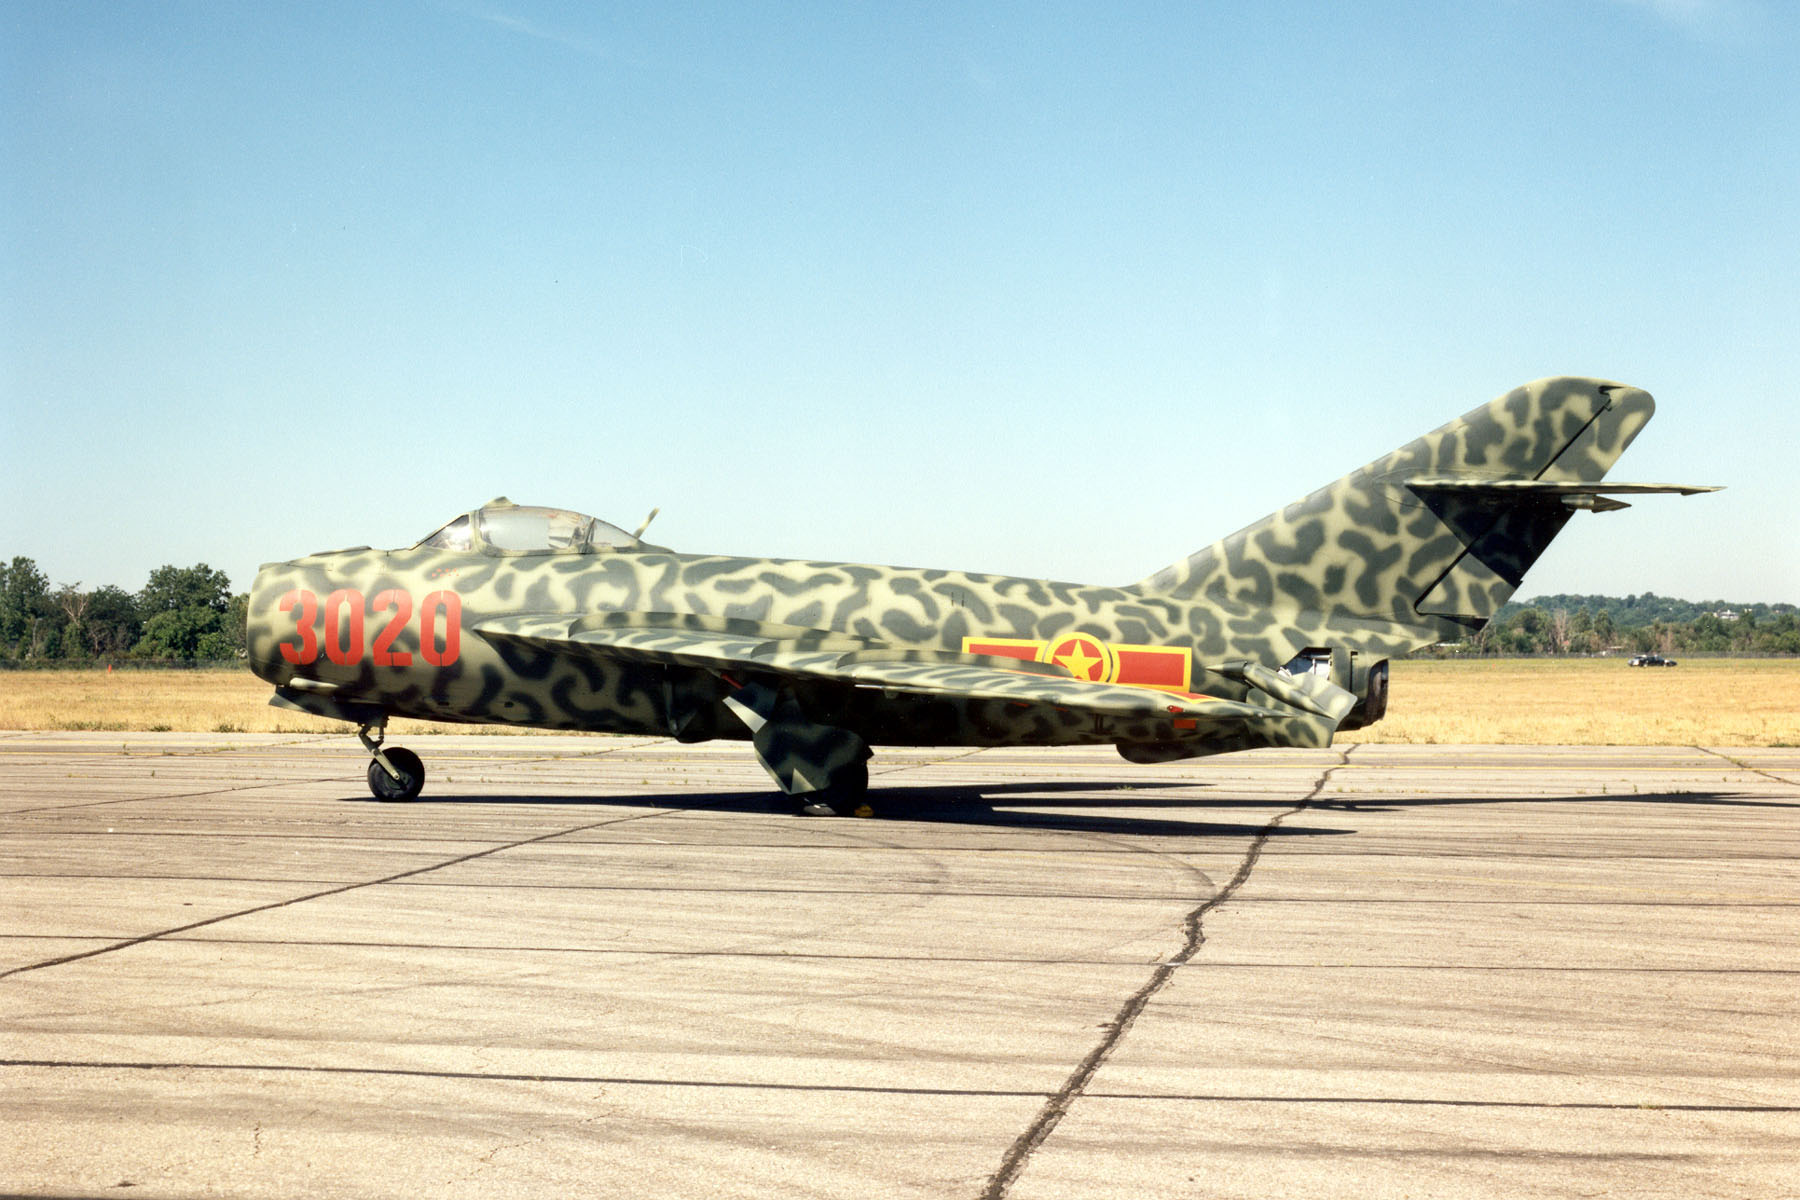 Mikoyan Gurevich MiG-17F in Vietnam Peoples' Air Force markings at the National Museum of the United States Air Force, Wright-Patterson Air Force Base, Ohio. (U.S. Air Force).